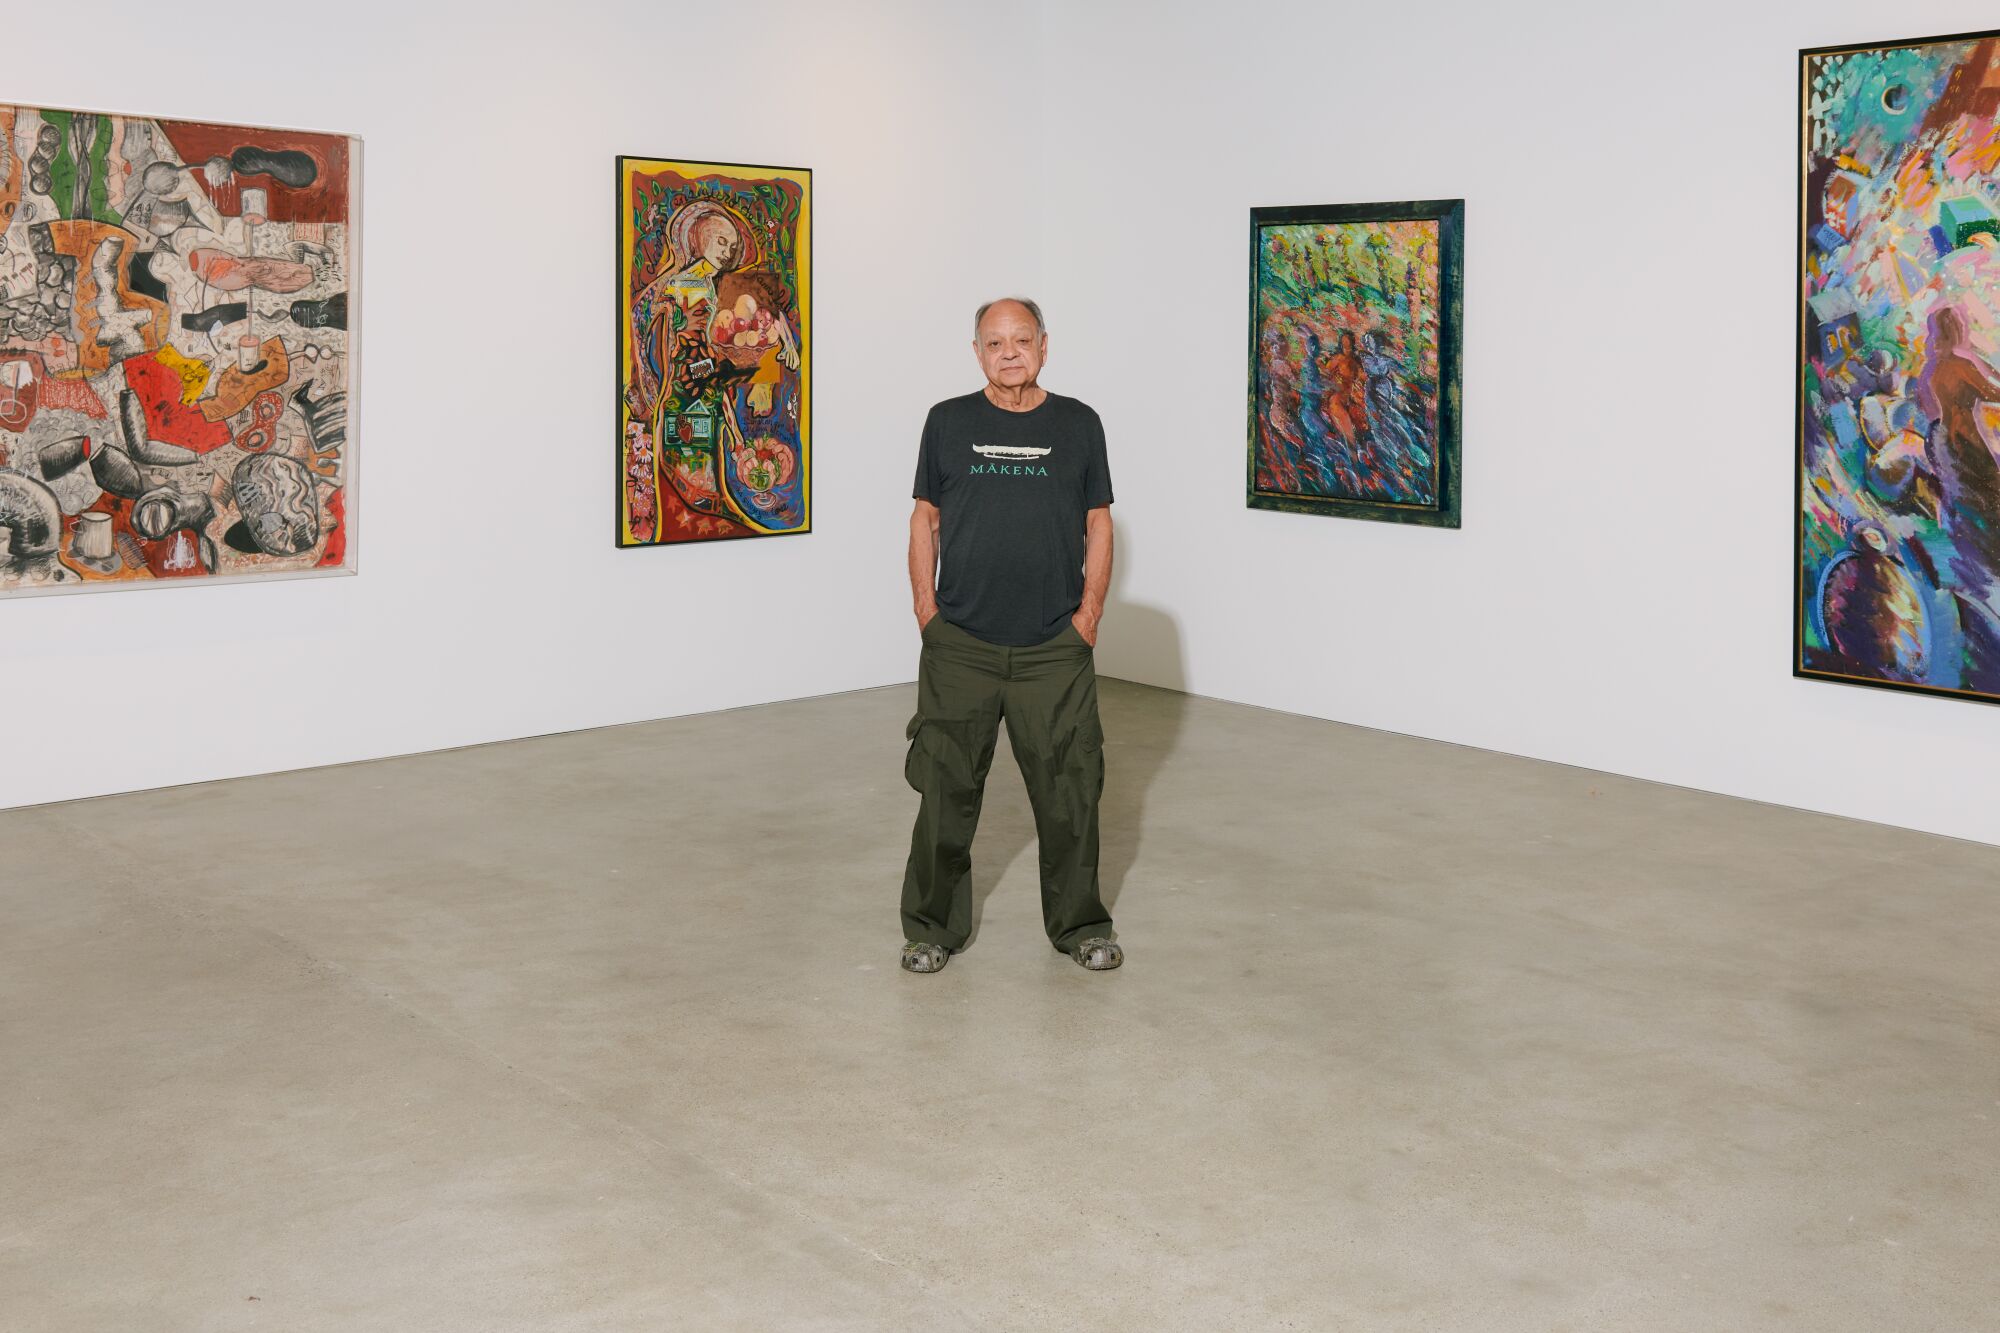 A man stands with his hands in his pockets in front of colorful paintings in a white-walled gallery.